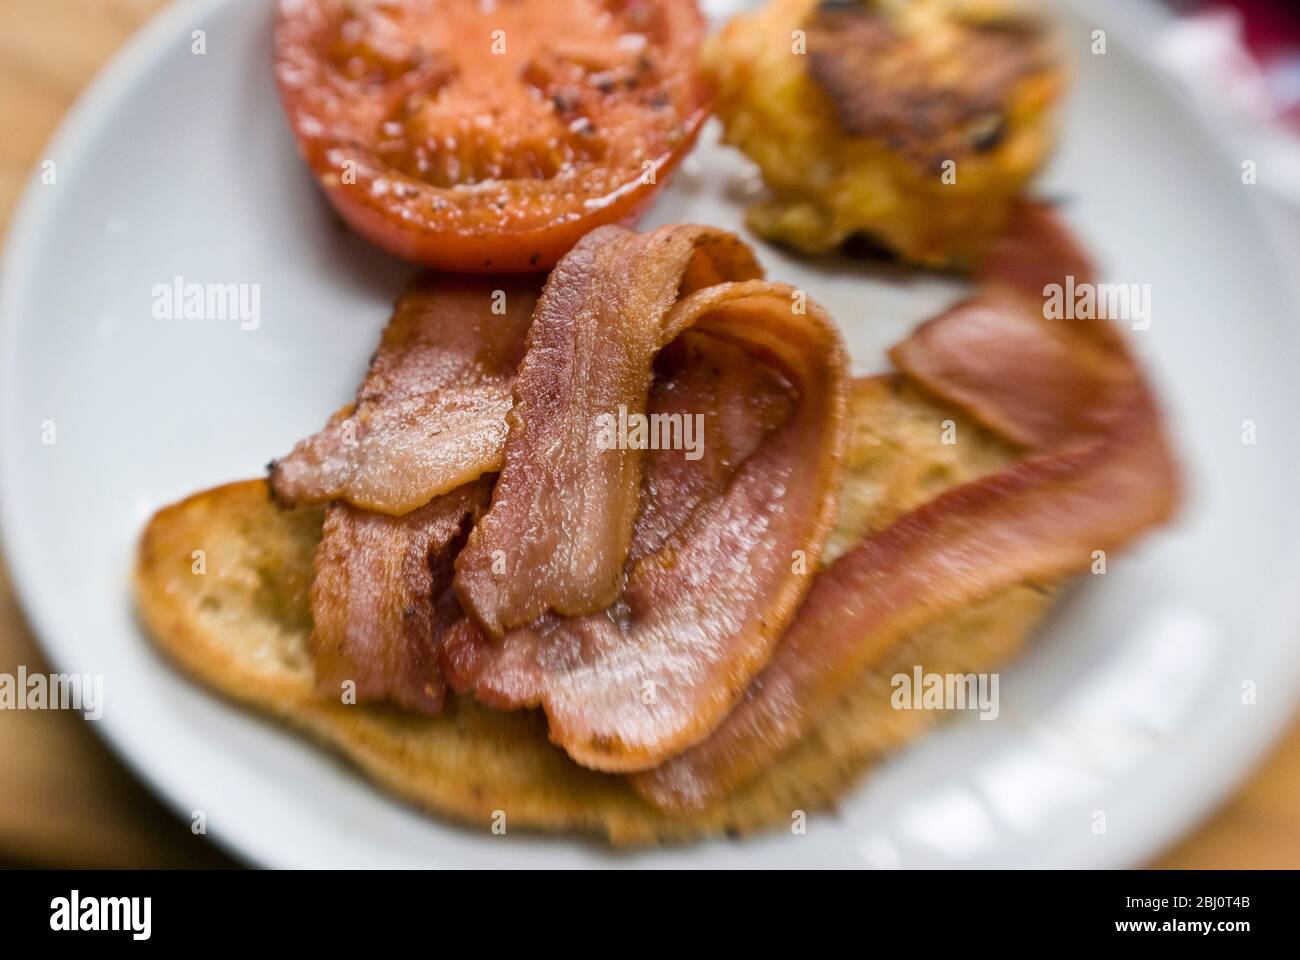 Cooked breakfast of grilled bacon, tomato, potao cake and fried bread - Stock Photo